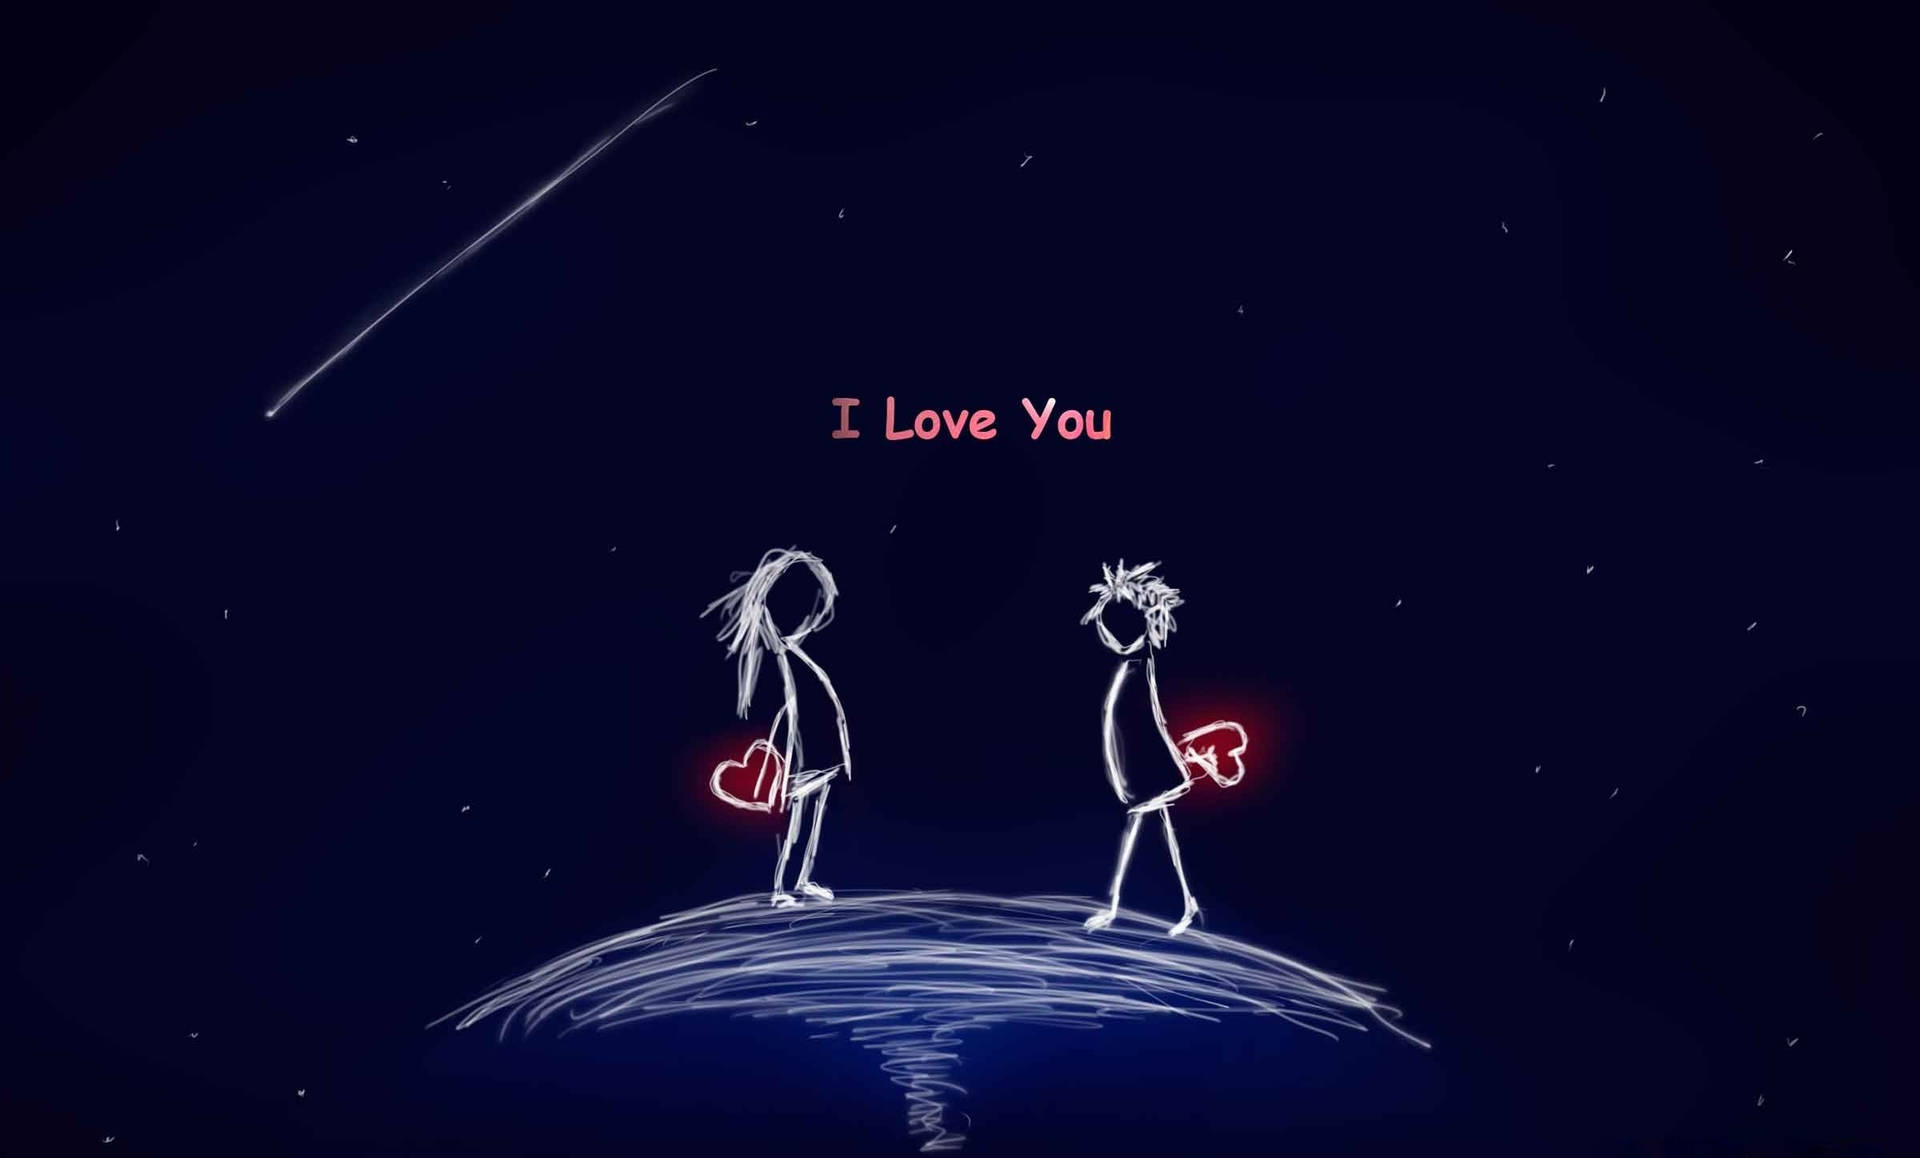 Free Love Story Wallpaper Downloads, [100+] Love Story Wallpapers for FREE  